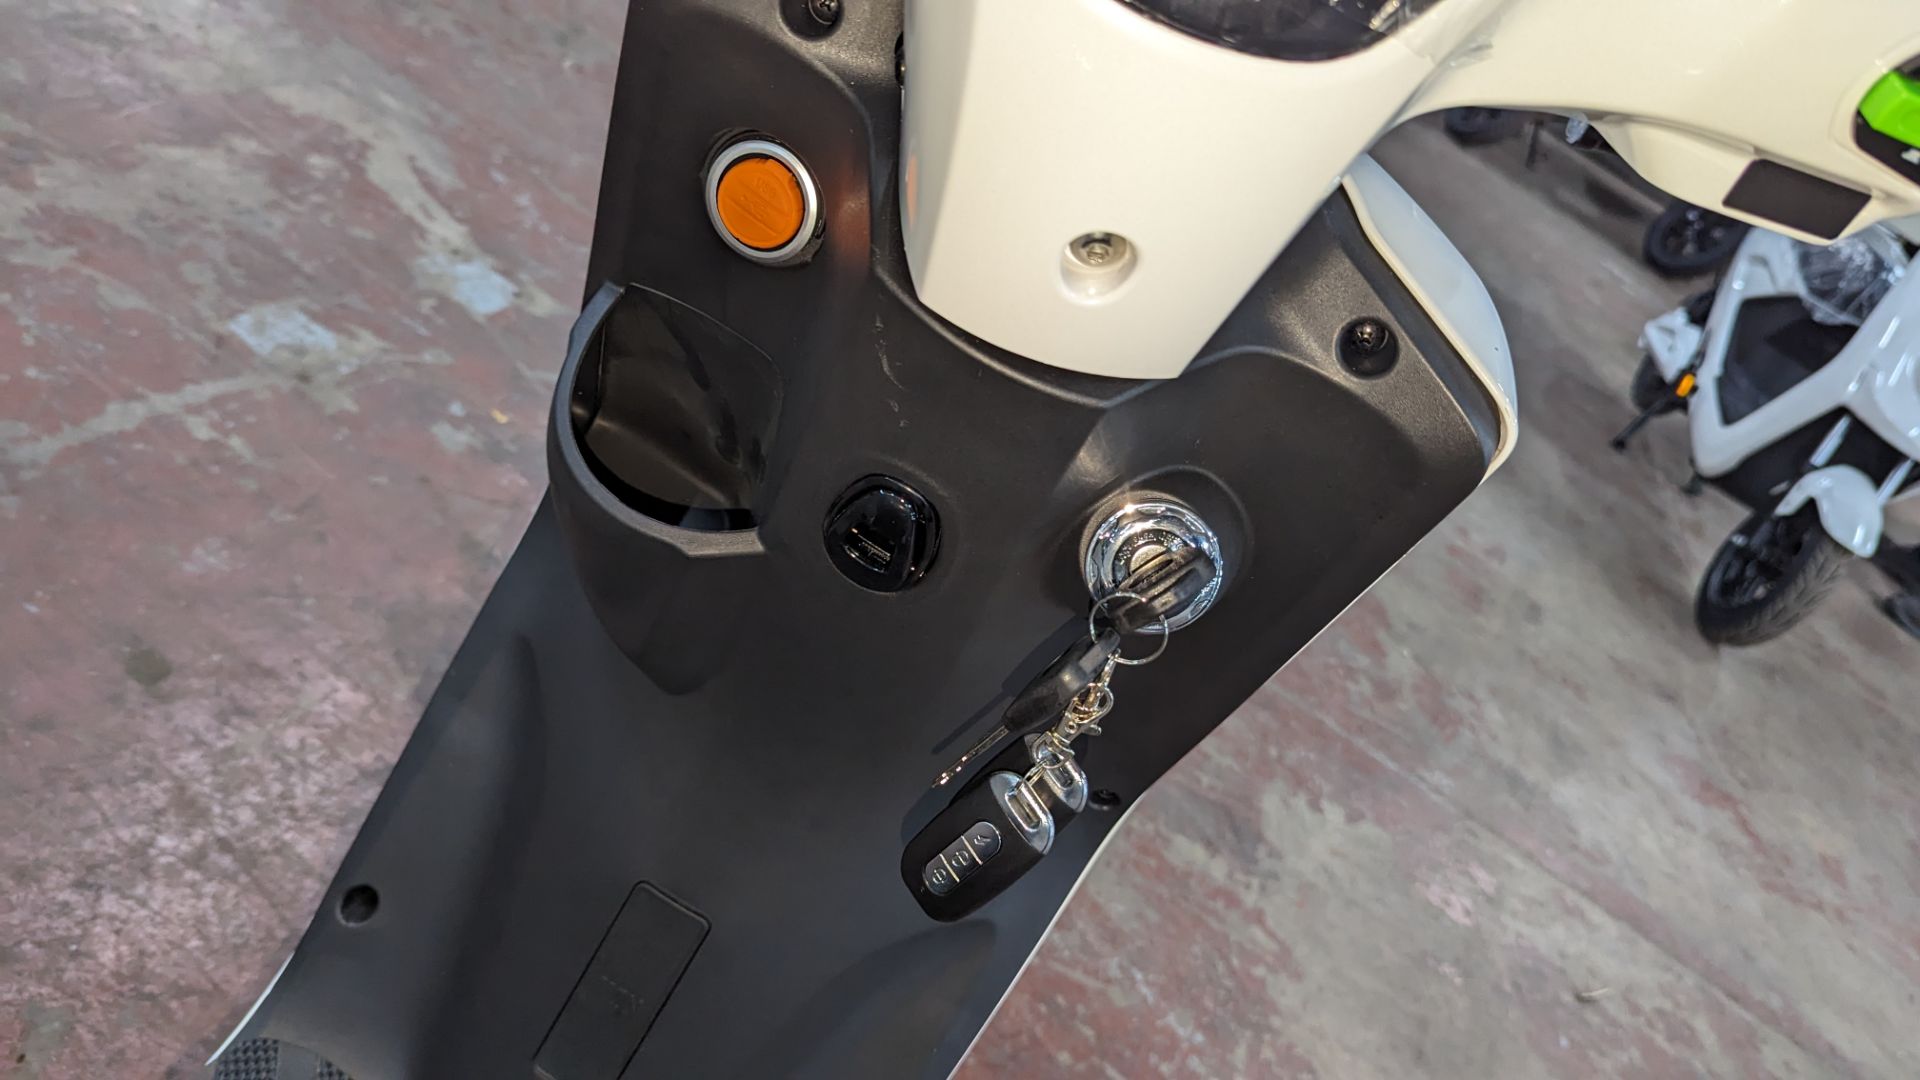 Model 18 Electric Bike: Zero (0) recorded miles, white body with black detailing, insulated box moun - Image 12 of 14